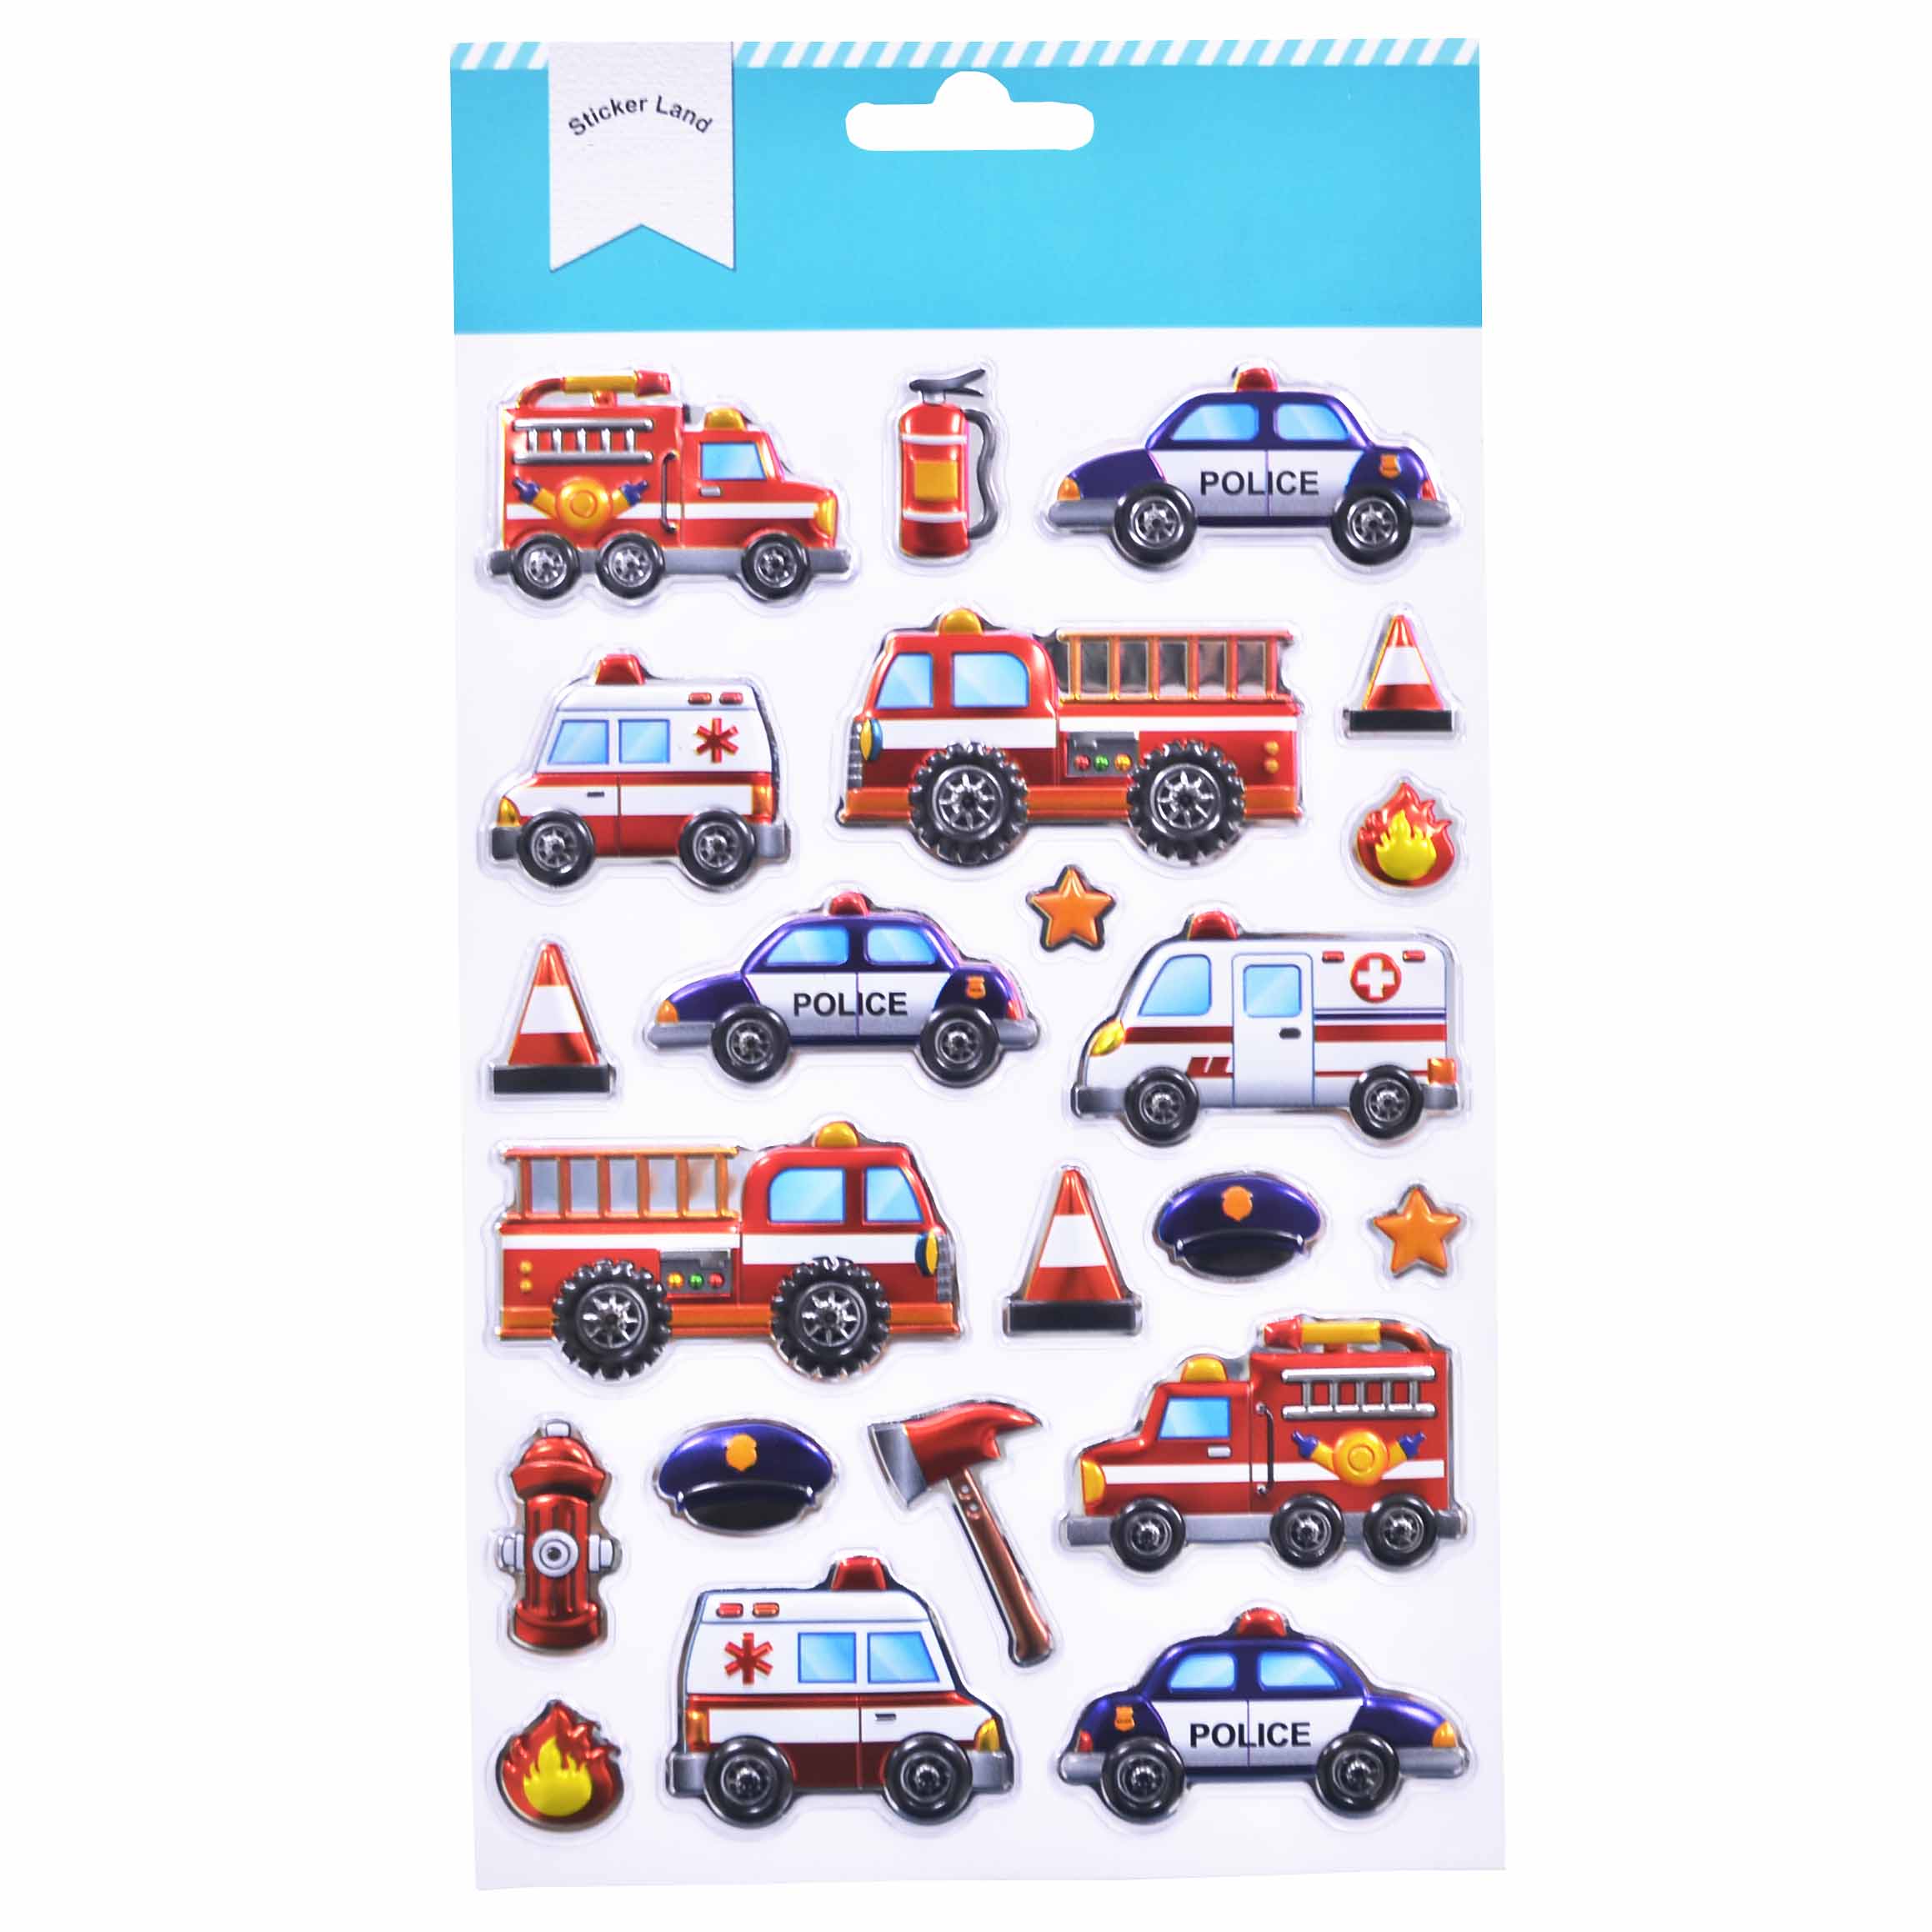 Police And Fire Engine Vehicles Design Stereo Balloon For Sticker Book